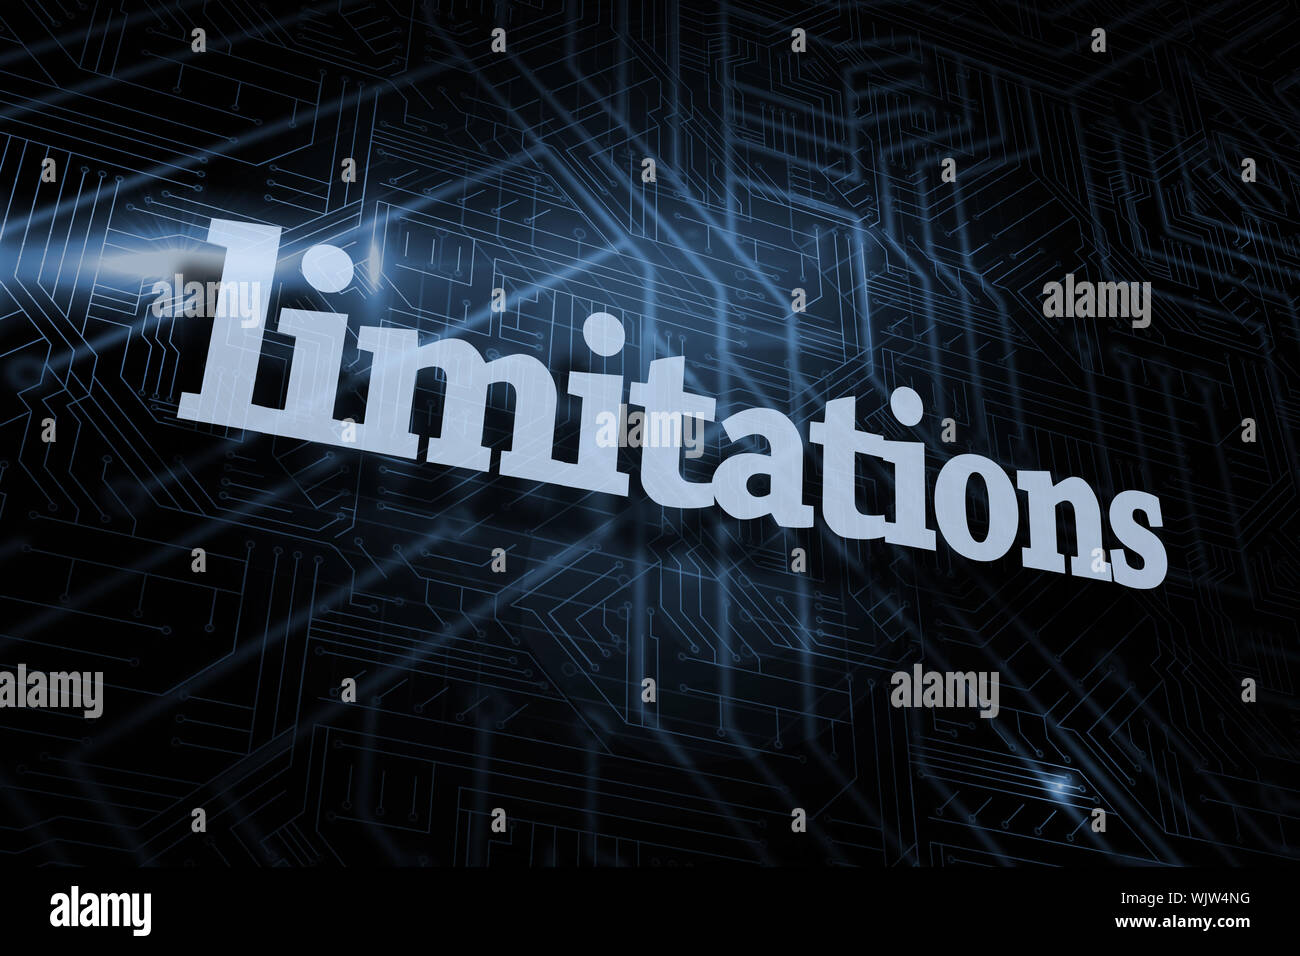 The word limitations against futuristic black and blue background Stock Photo